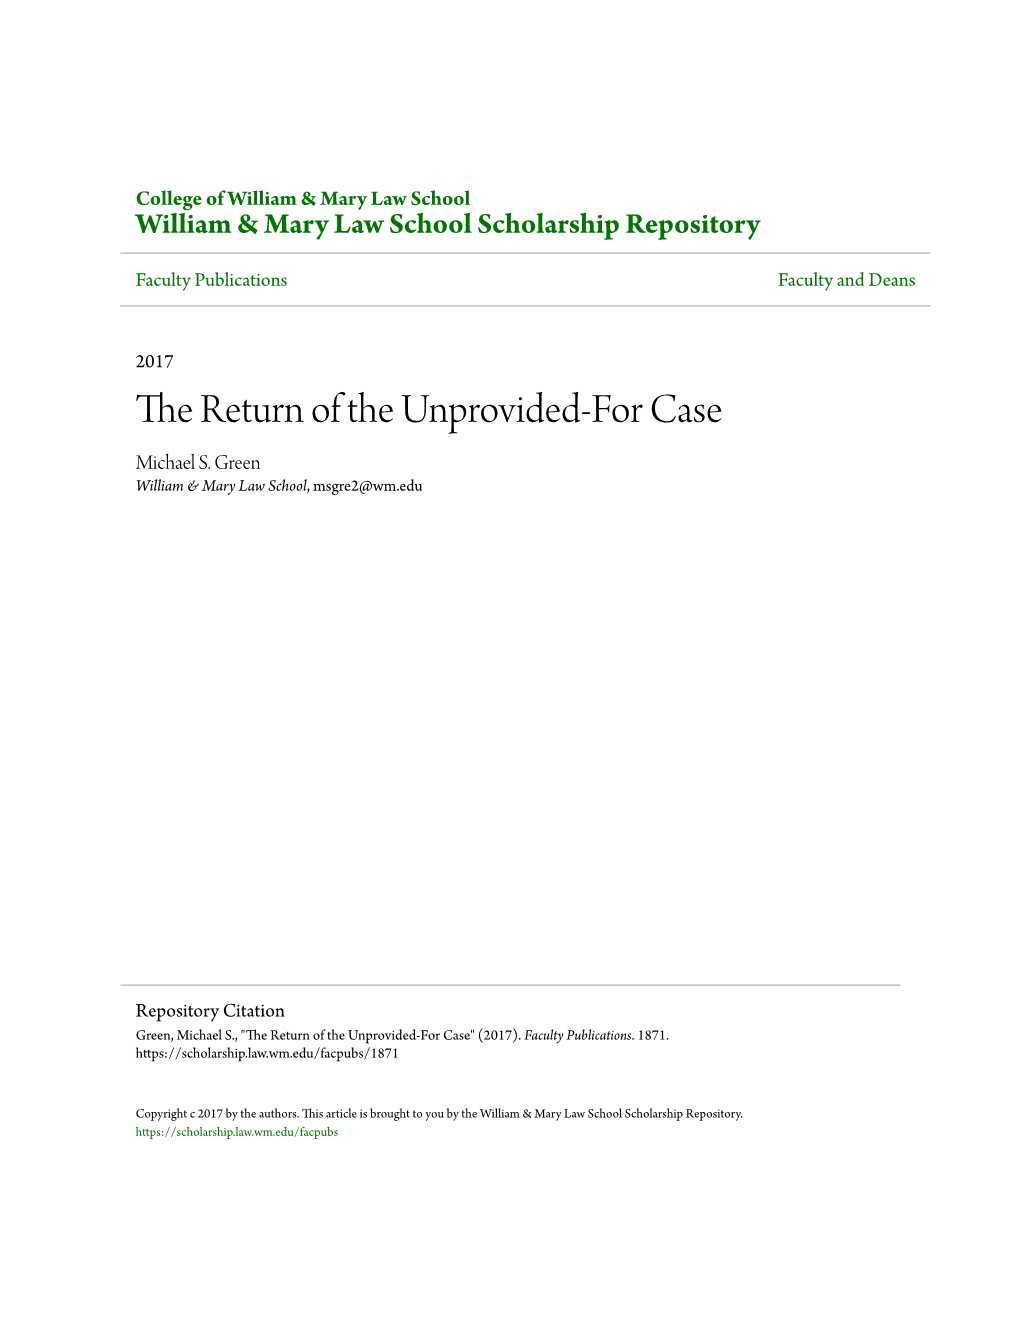 The Return of the Unprovided-For Case Michael S